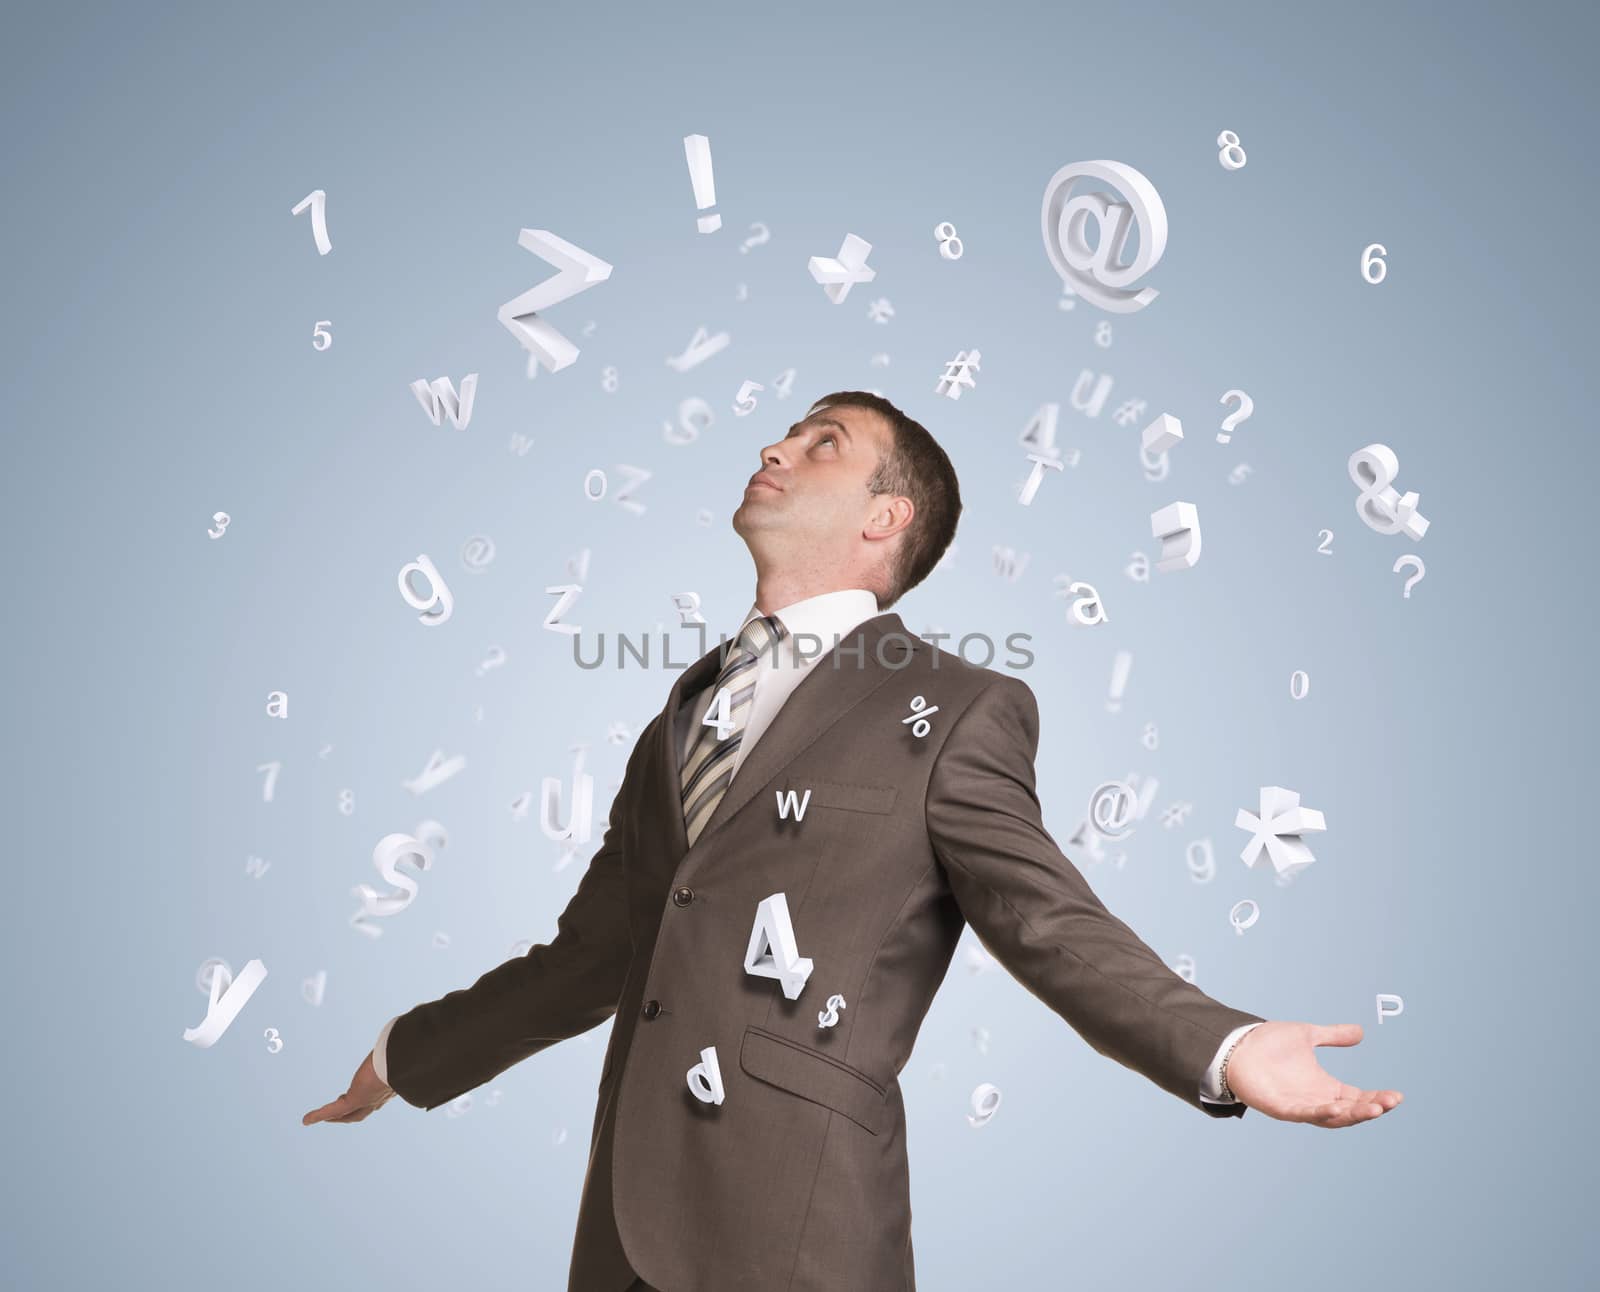 Businessman in suit spread his arms and looking up. Figures and letters fall from above